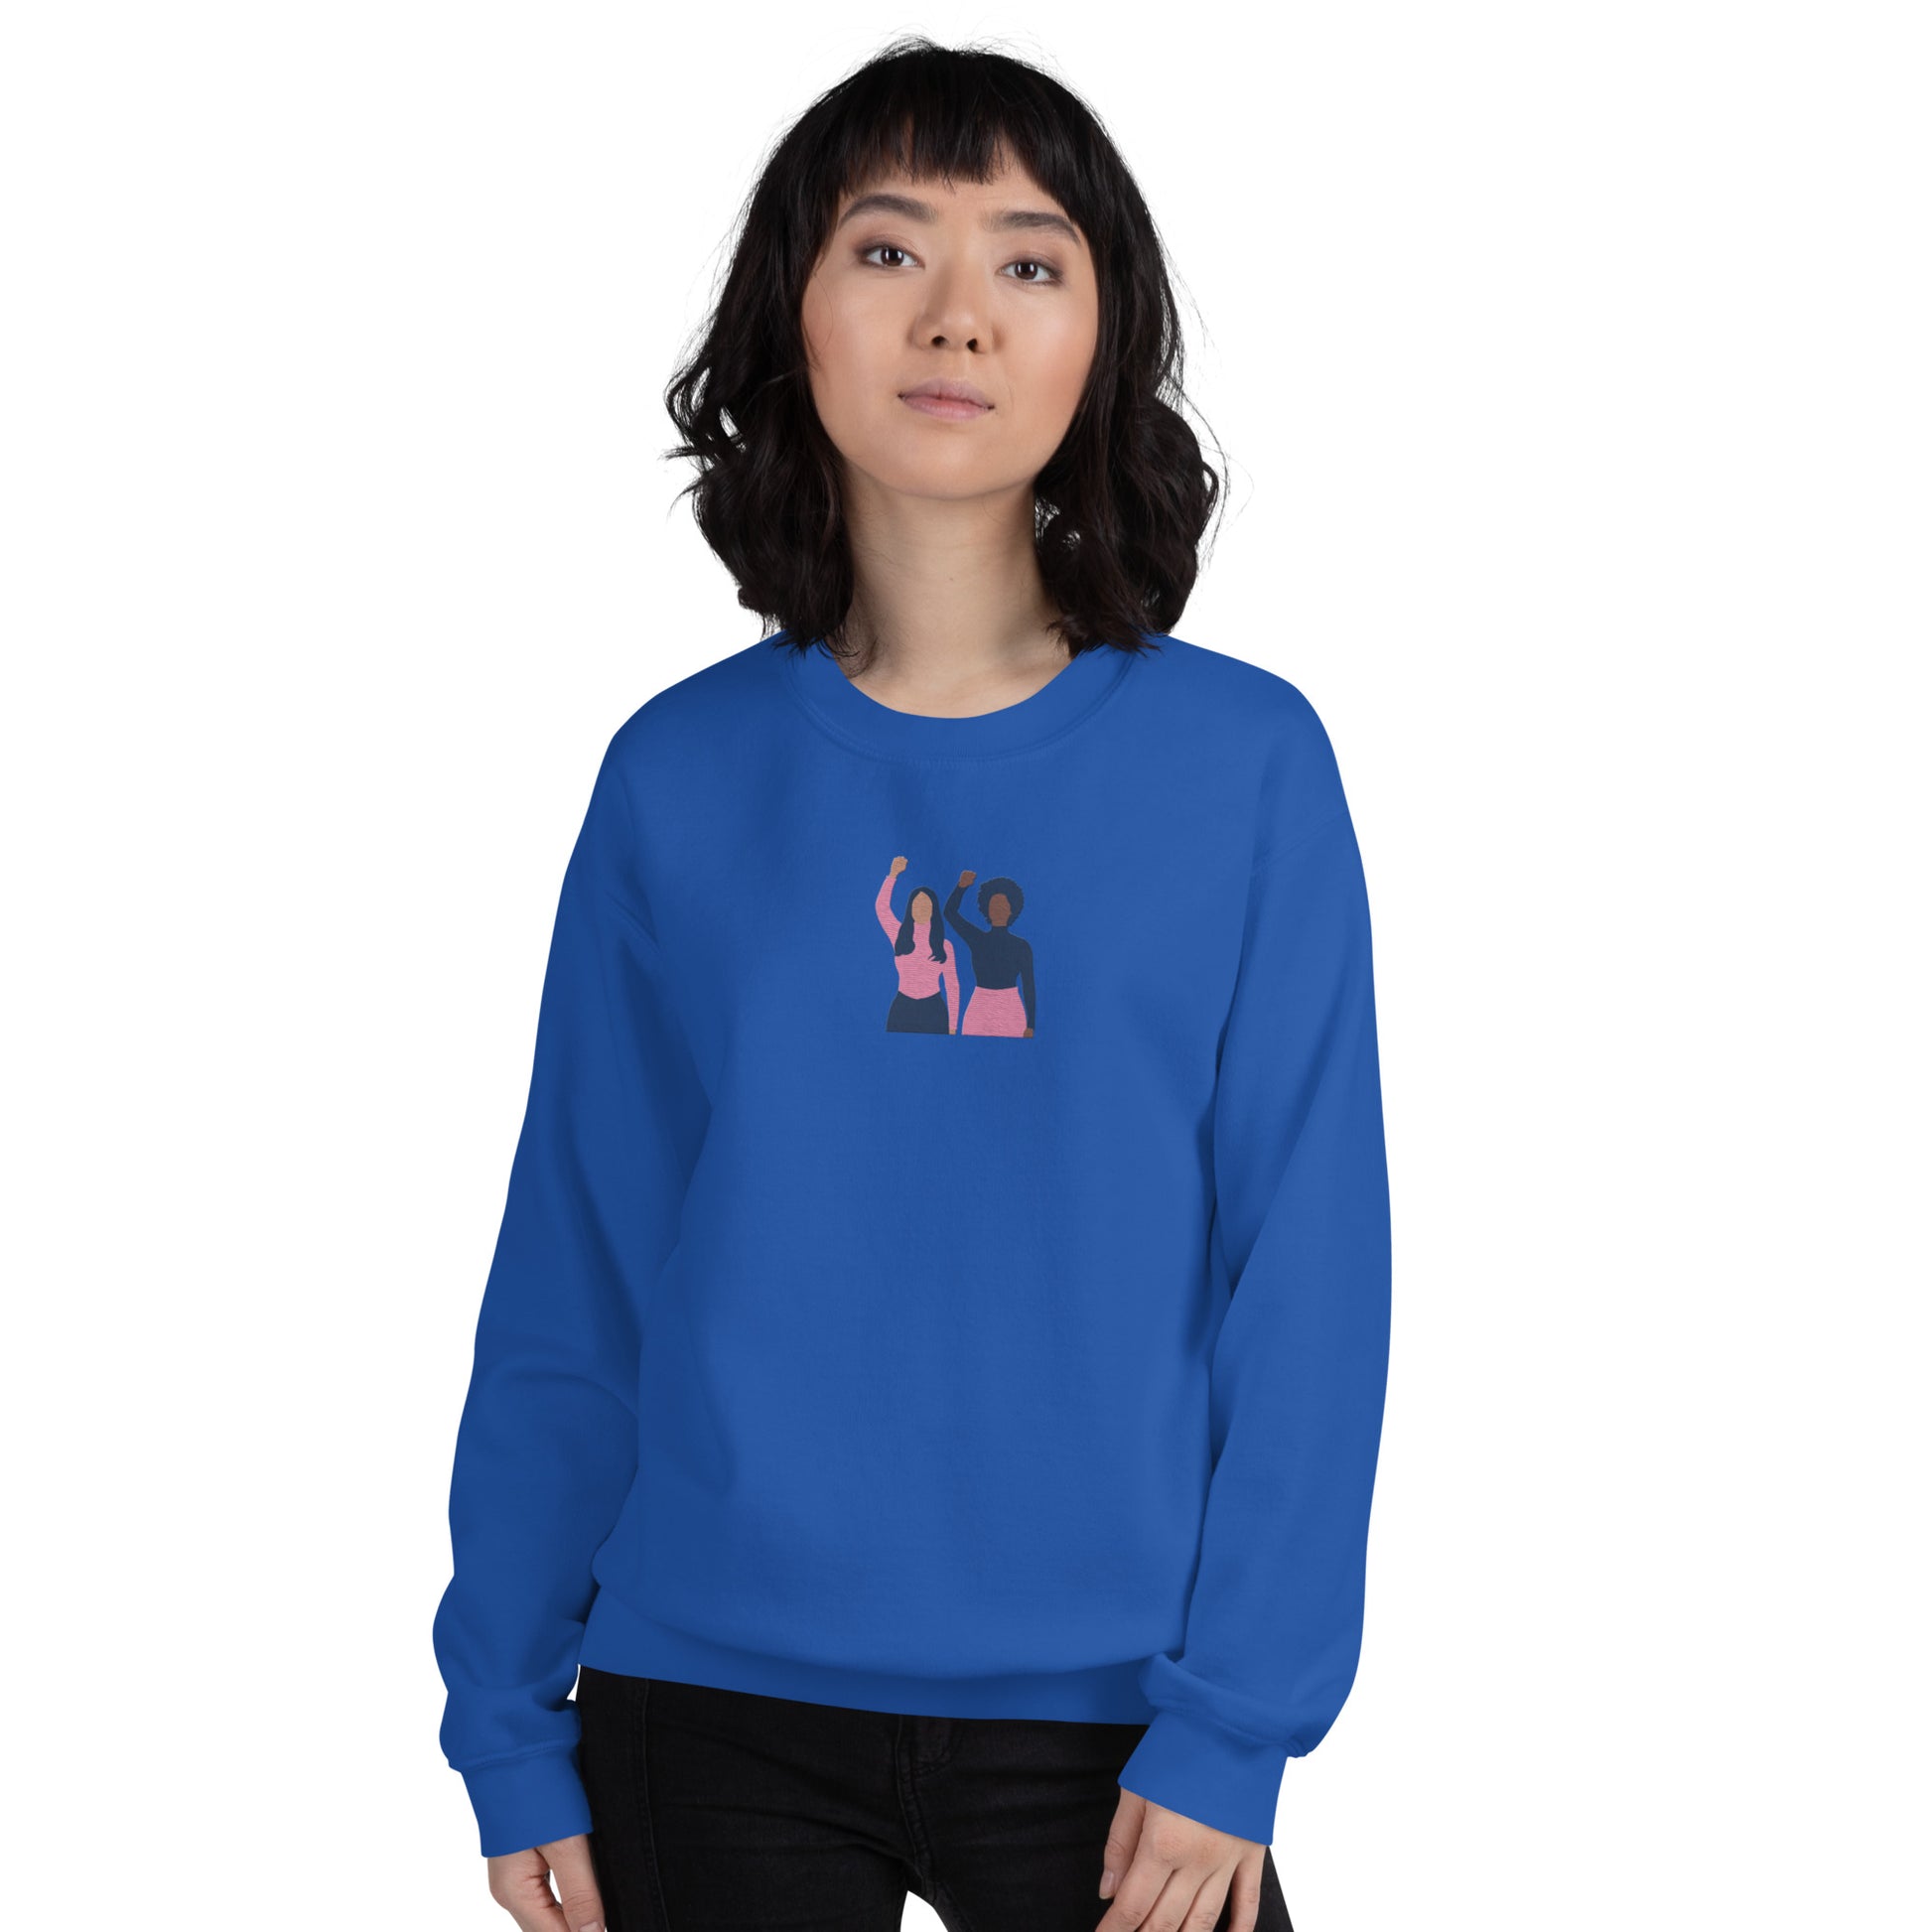 Empowered Woman Embroidered Sweatshirt Royal